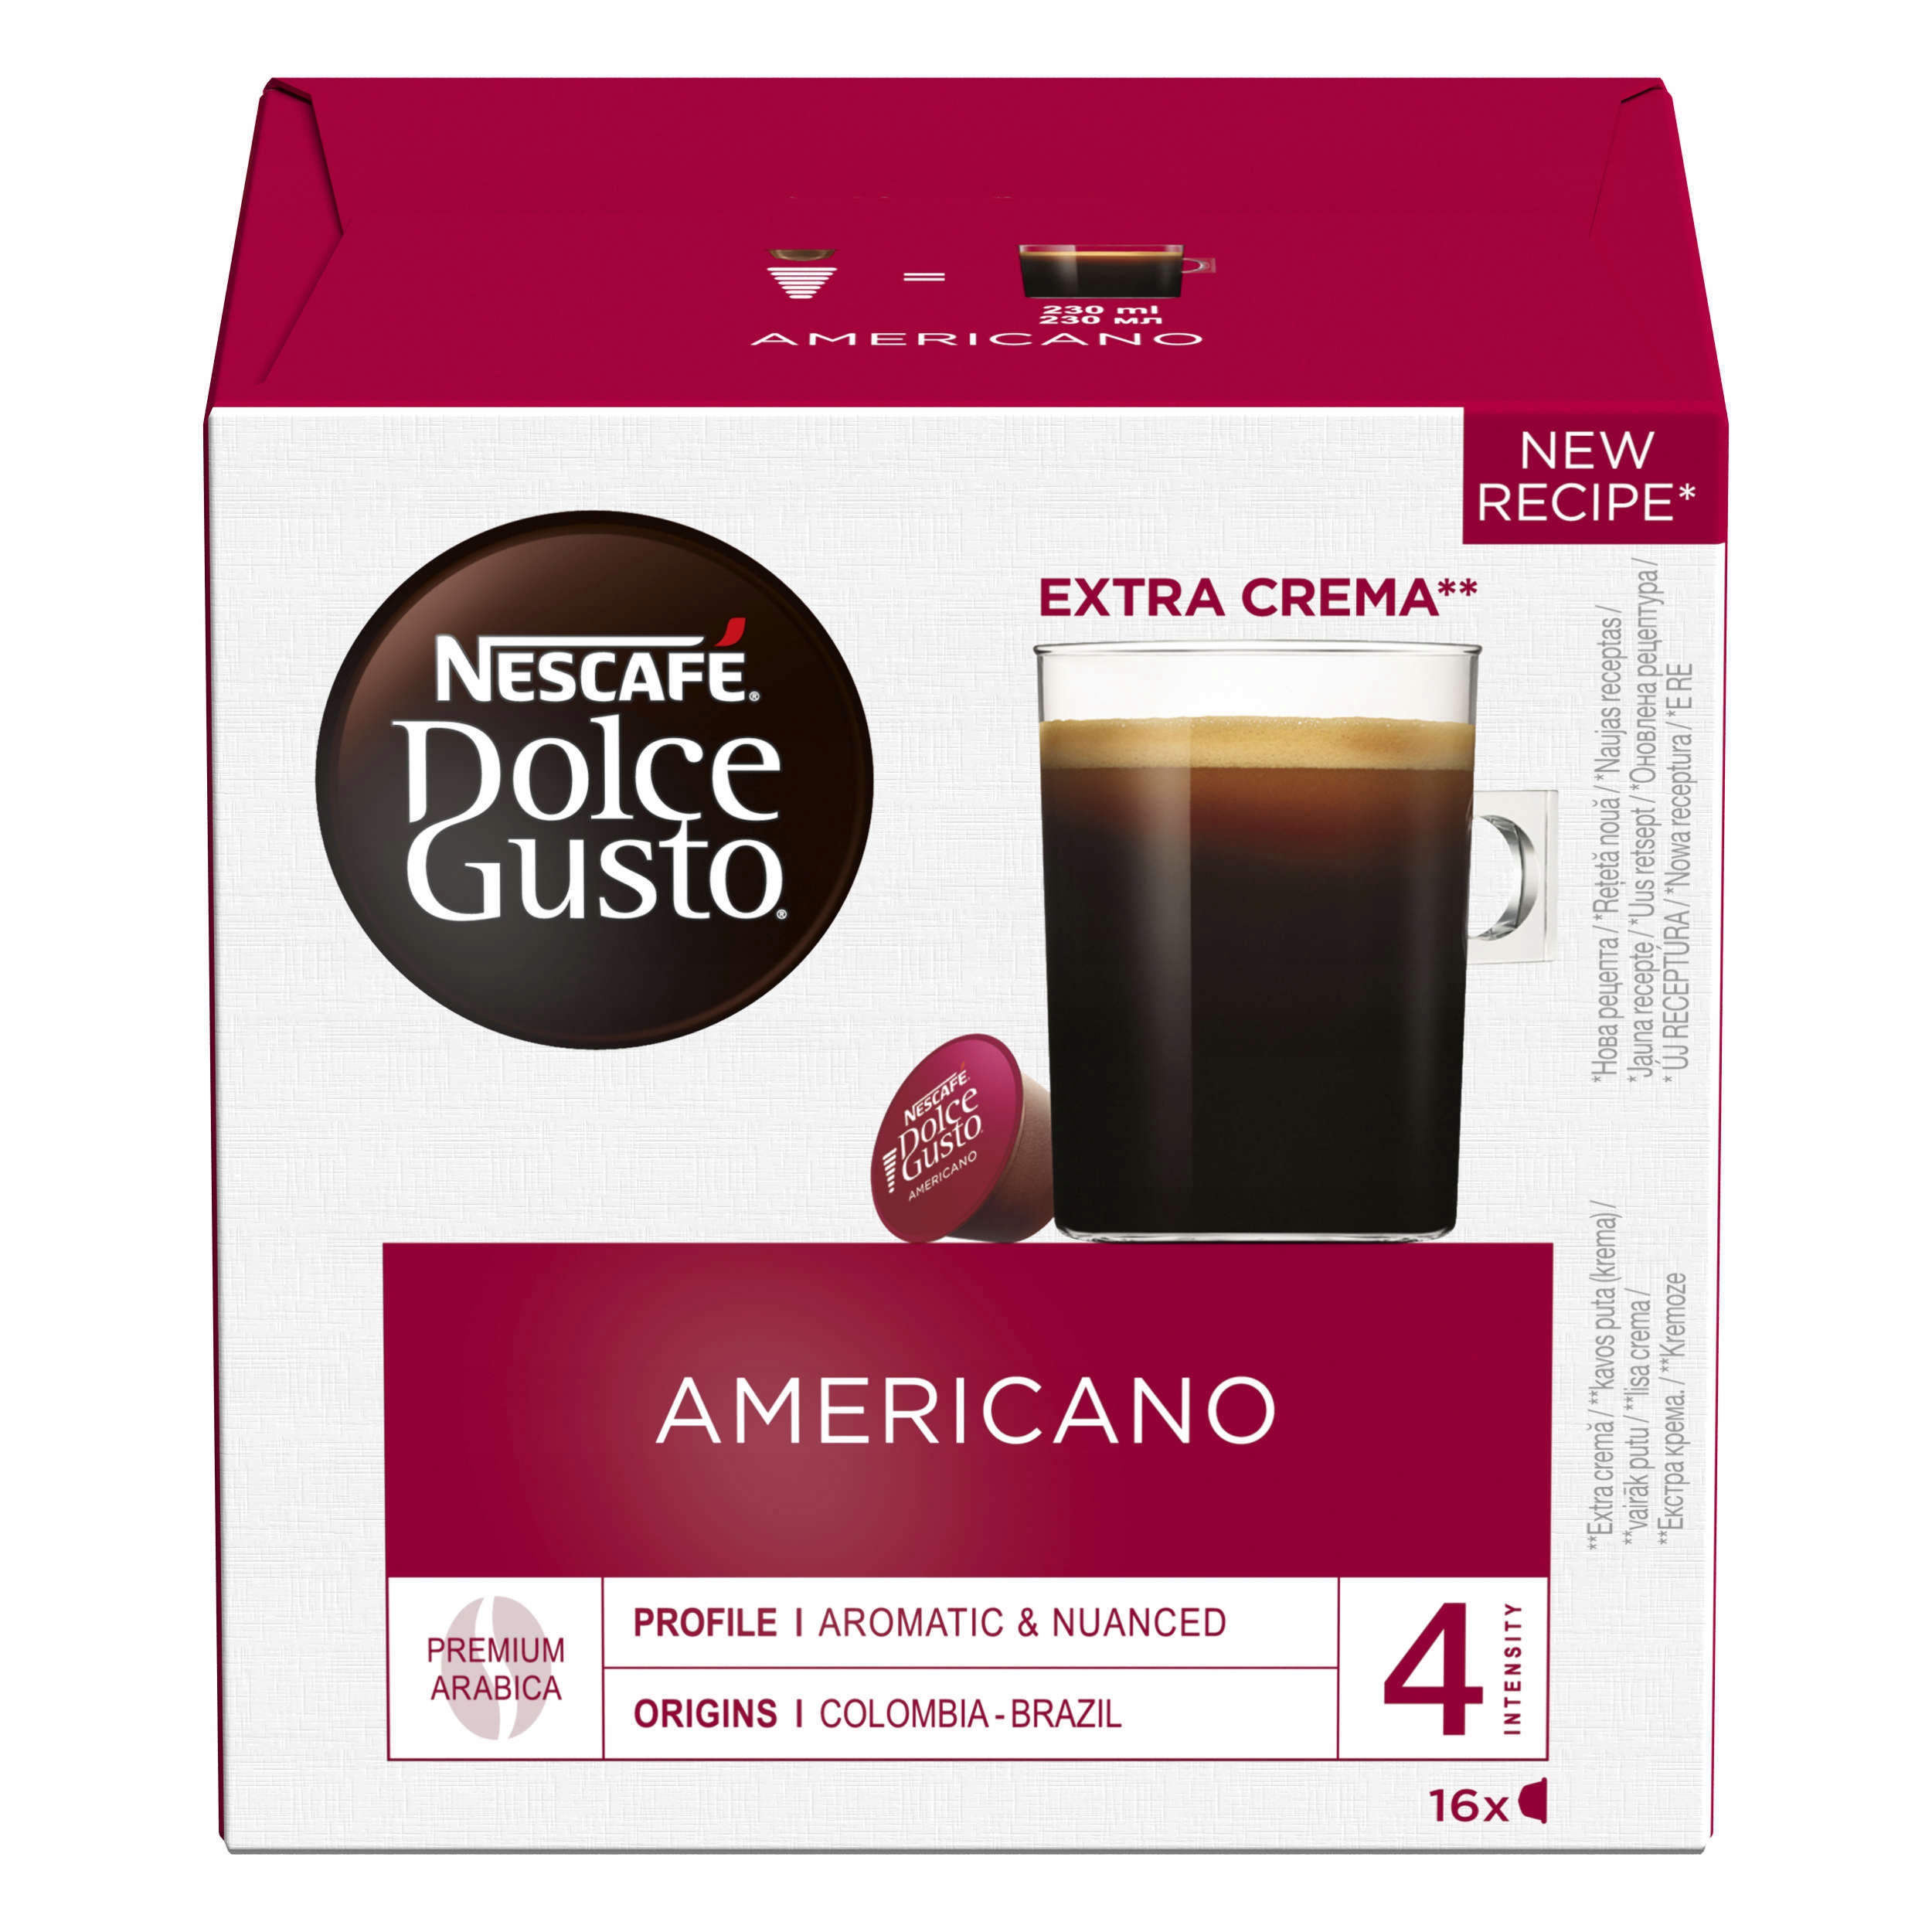 Dolce gusto americano. Nescafe Dolce gusto капсулы americano. Эспрессо Интенсо Дольче густо. Dolce gusto капсулы Espresso-intenso-1. Dolce gusto кофе лунго капс.16шт.